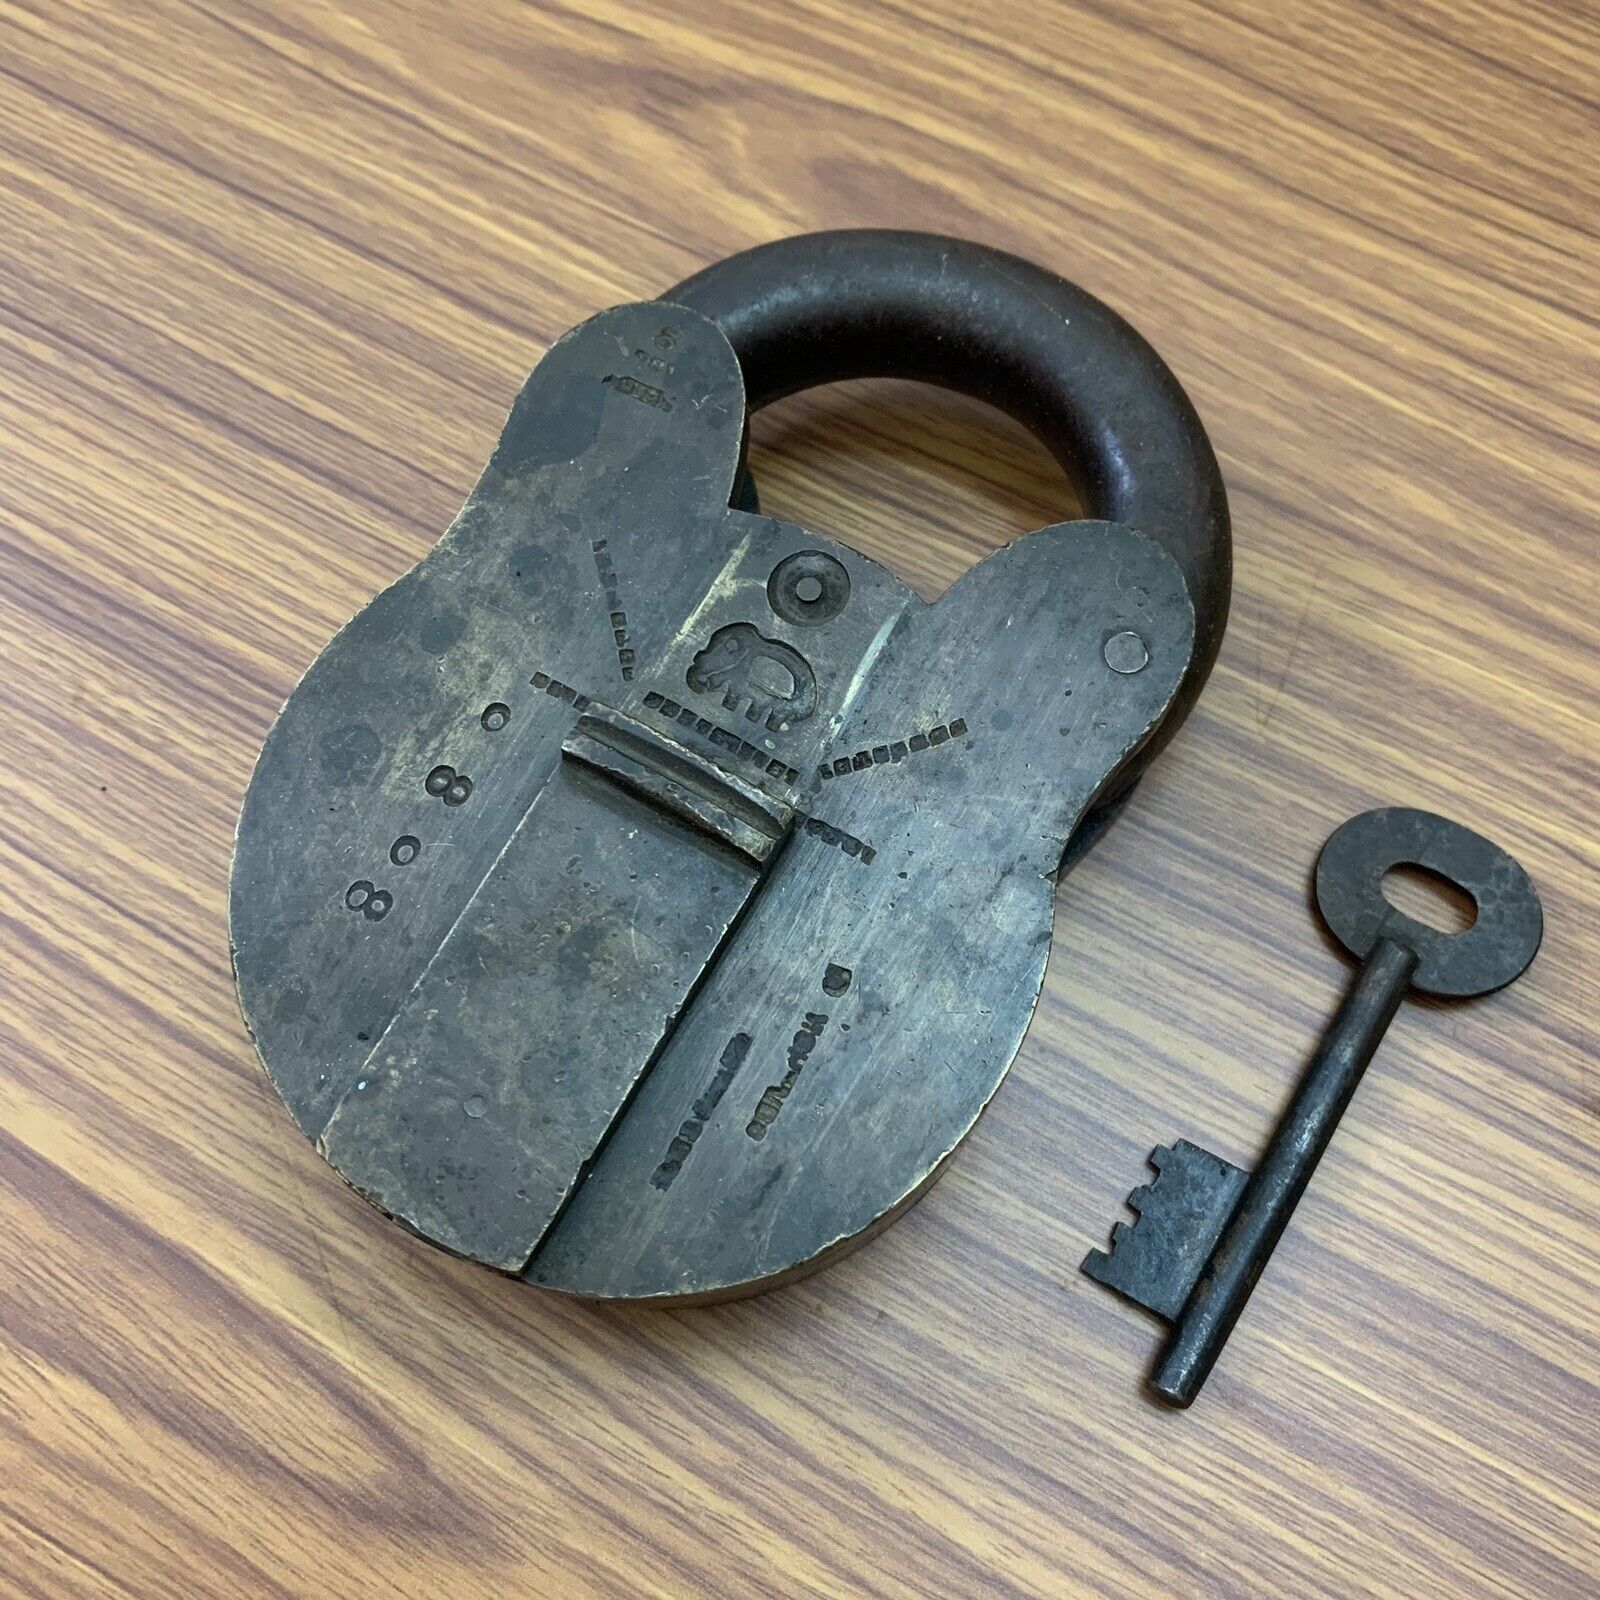 BRASS PADLOCK OR LOCK WITH KEY, OLD OR ANTIQUE BIG SIZED AND HEAVY, RICH PATINA